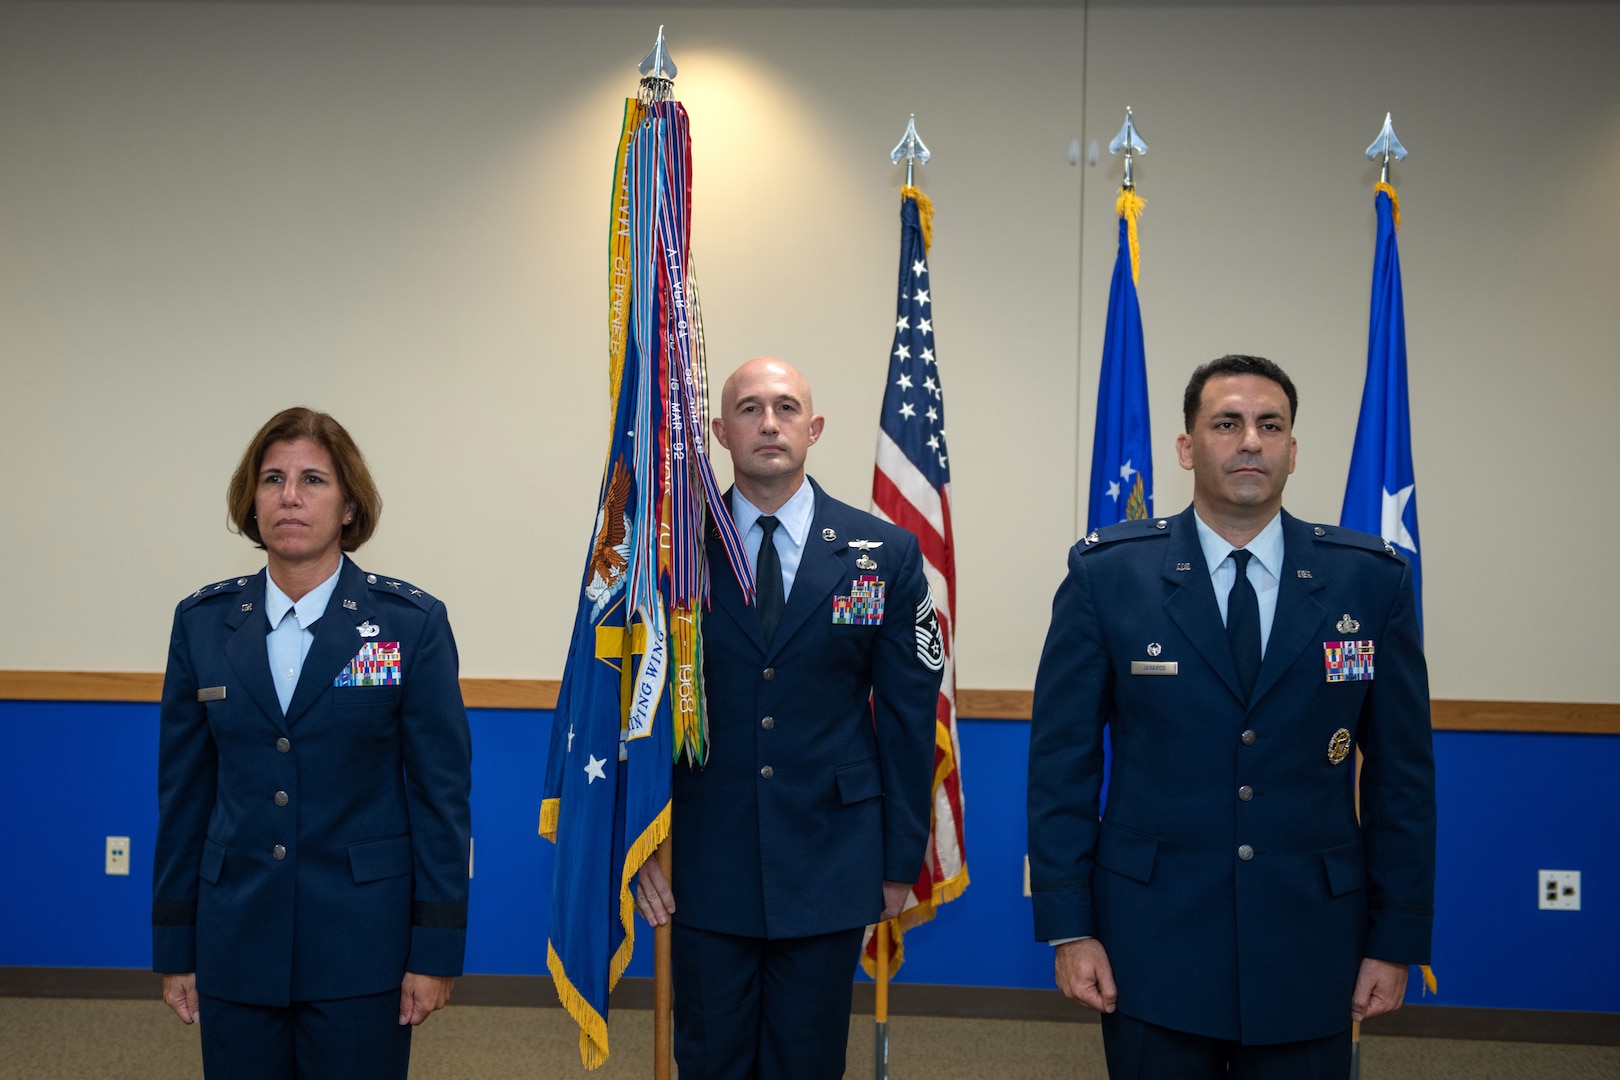 U.S. Air Force Maj. Gen. Andrea Tullos (left), Second Air Force commander and presiding officer, Keesler Air Force Base, Miss., and Col. Jason Janaros (right) stand at attention during the 37th Training Wing change of command ceremony July 15, 202